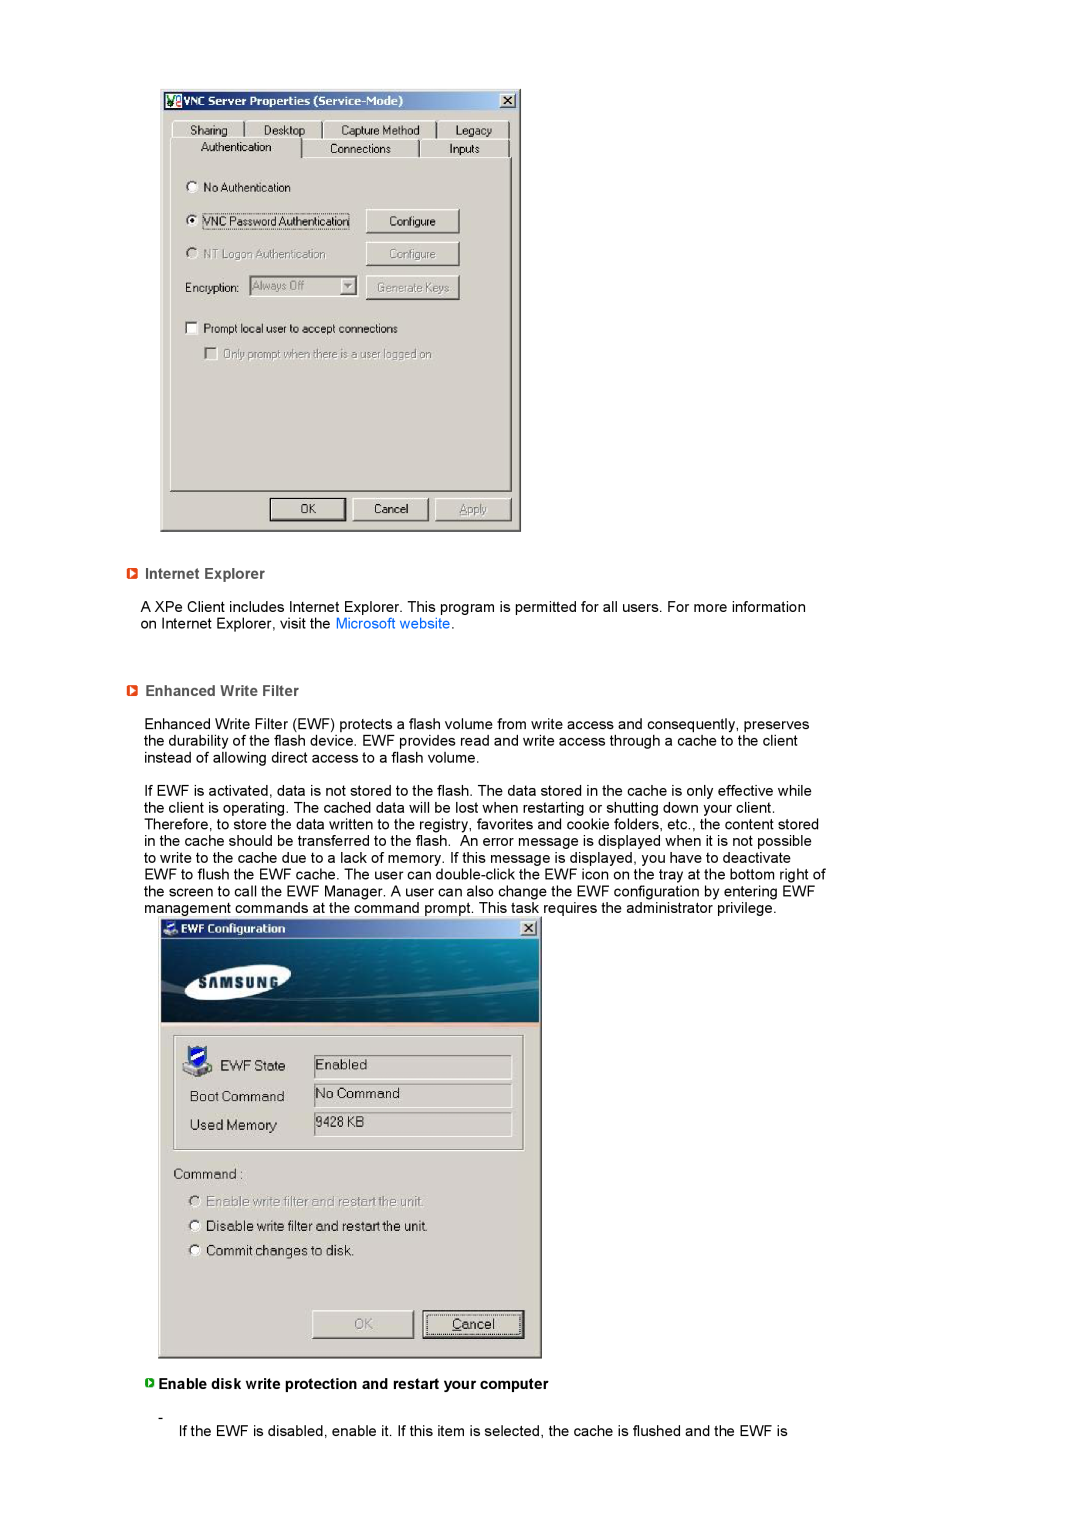 Samsung 920XT manual Internet Explorer, Enhanced Write Filter, Enable disk write protection and restart your computer 